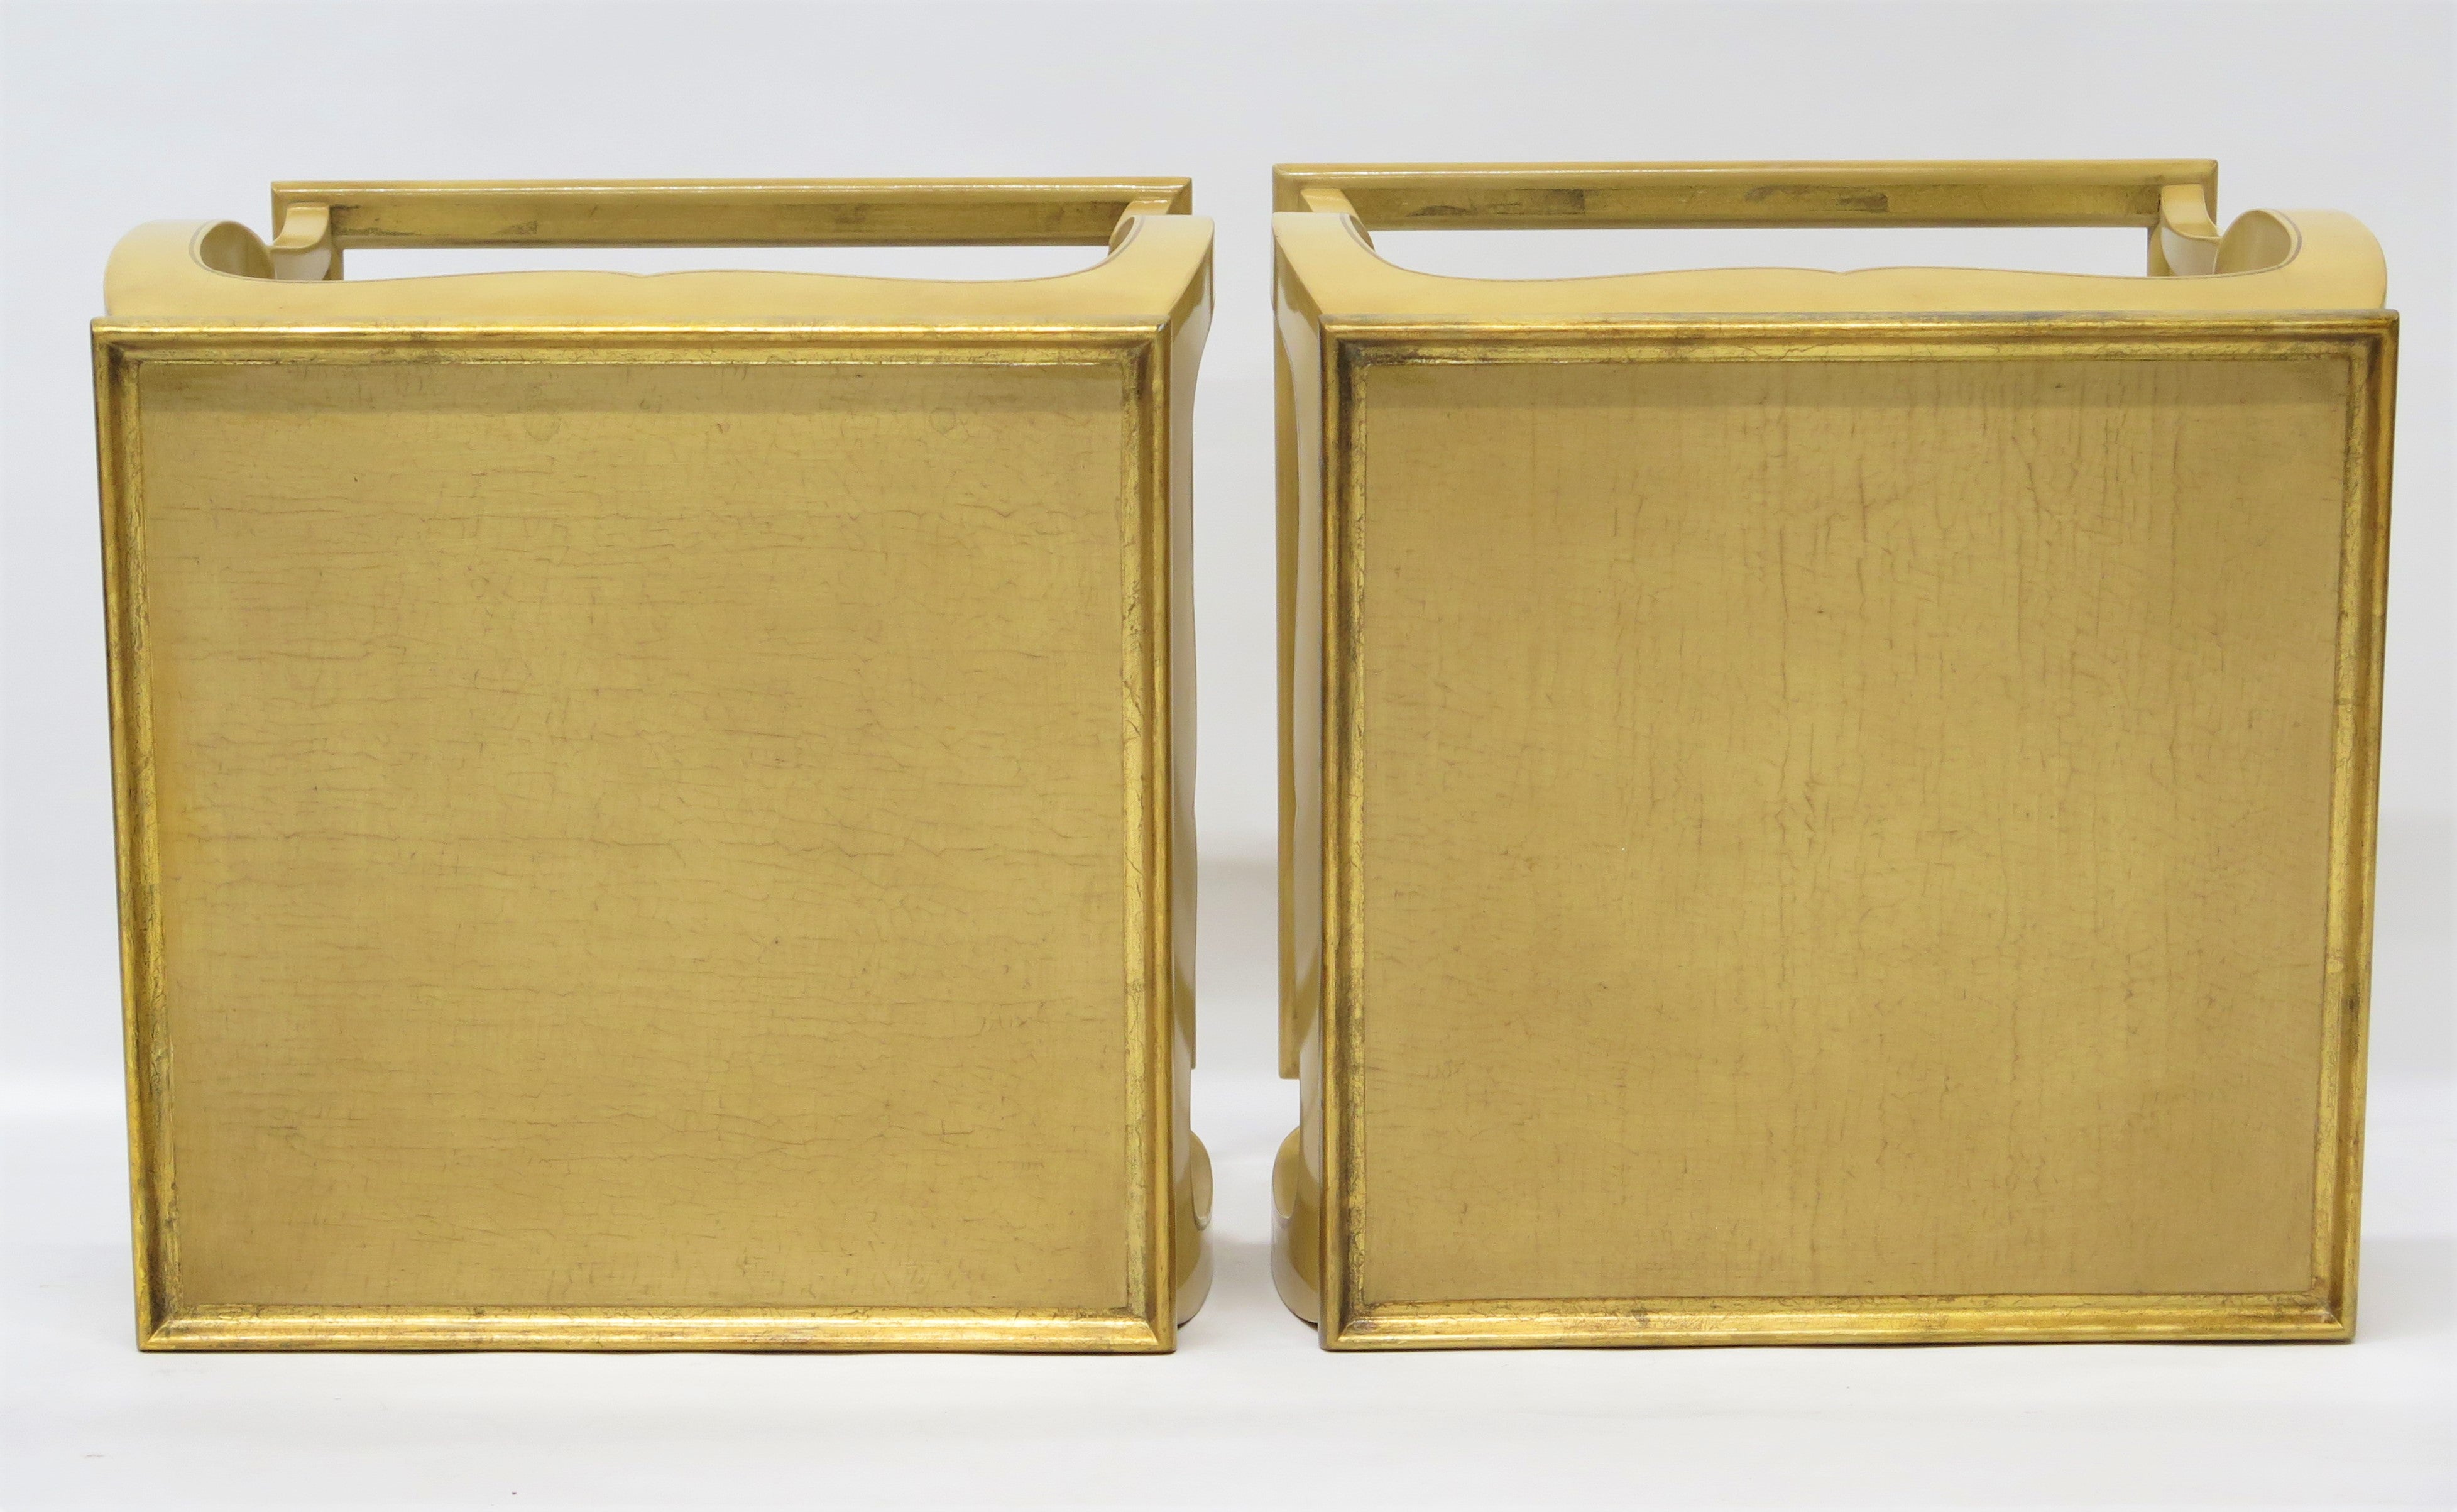 Pair of Lacquered Tables by Atelier Midavaine, Paris